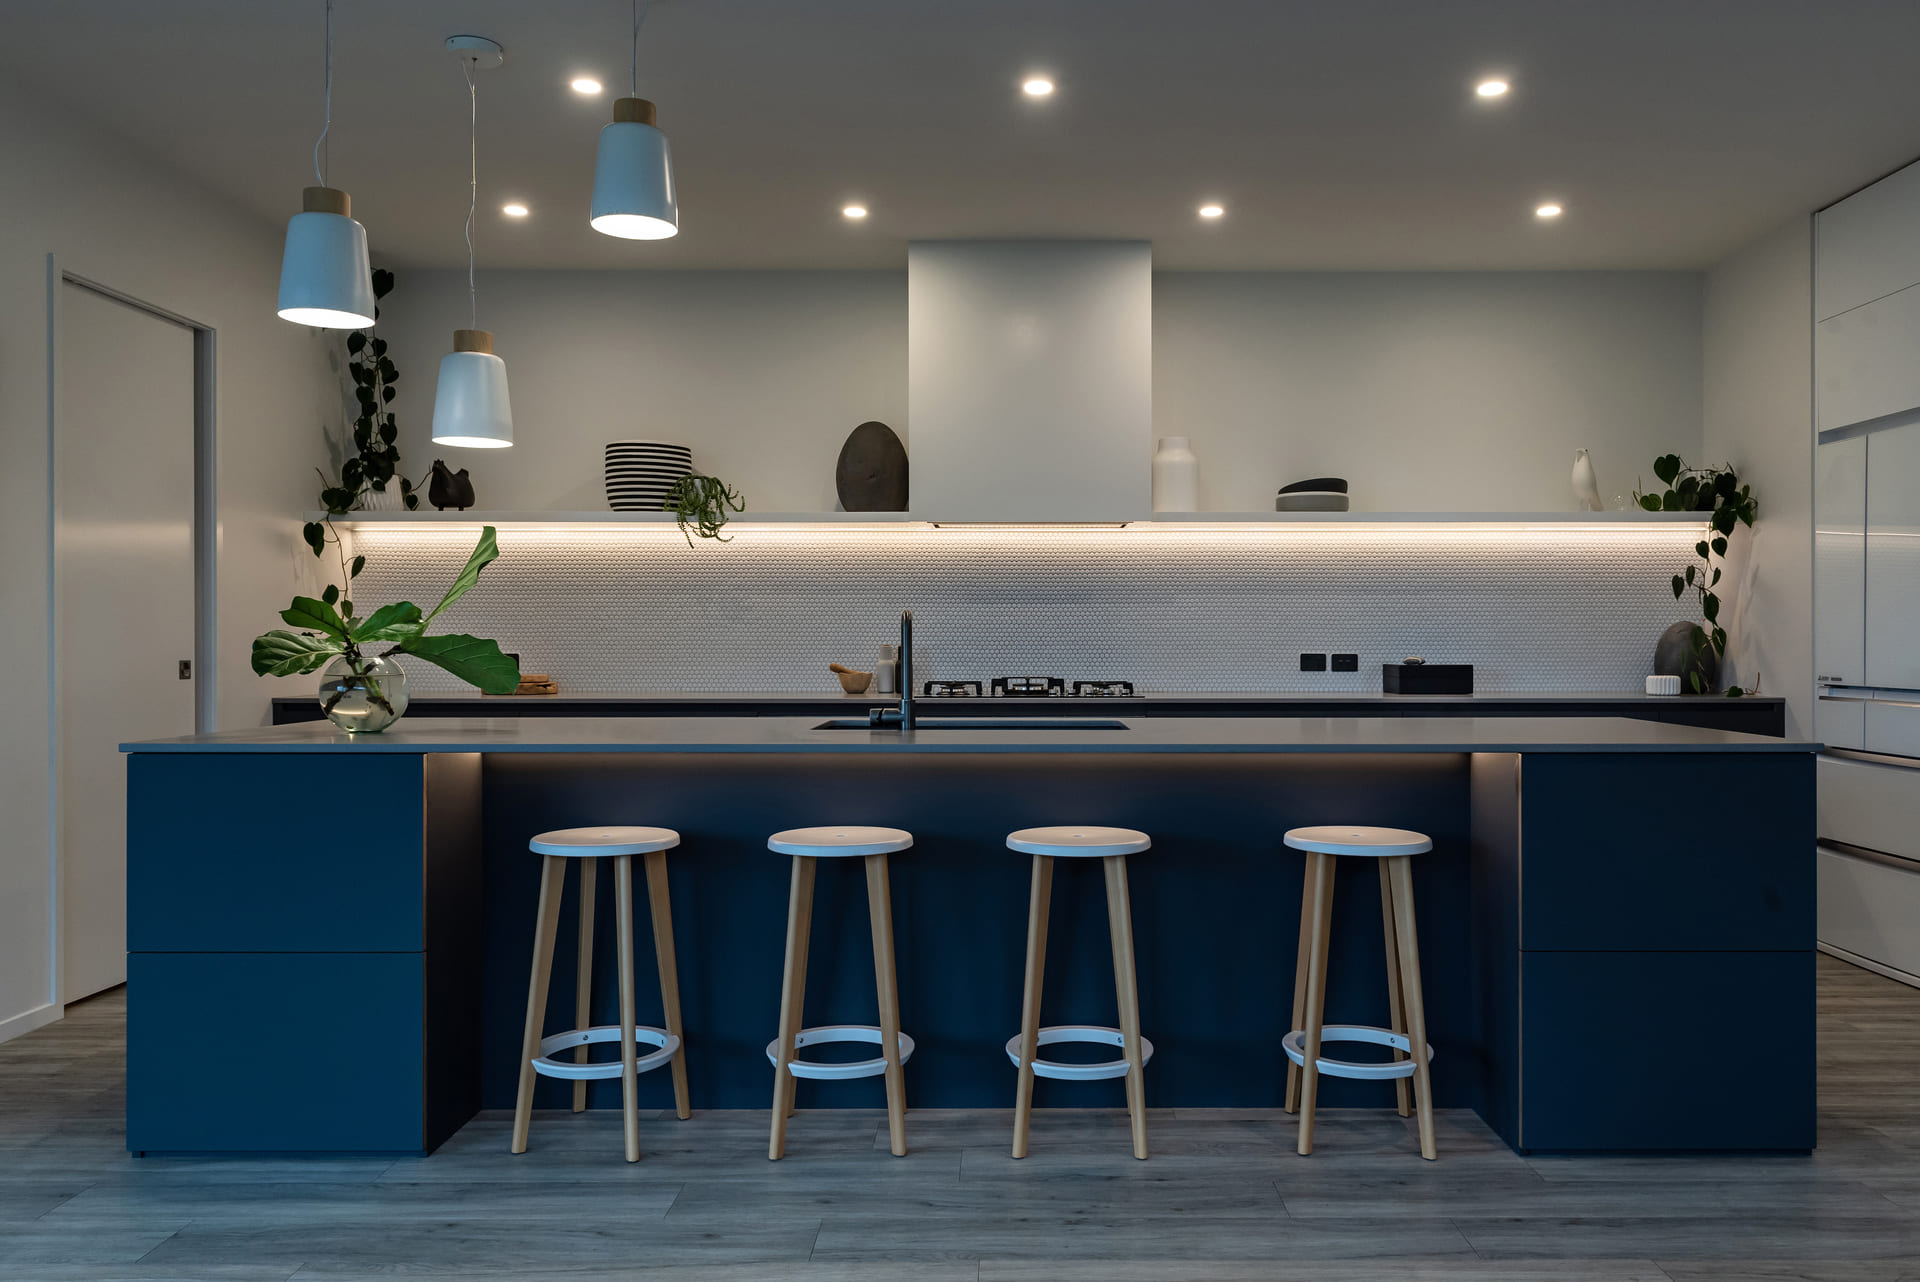 Image of Workshop kitchen in blue and white